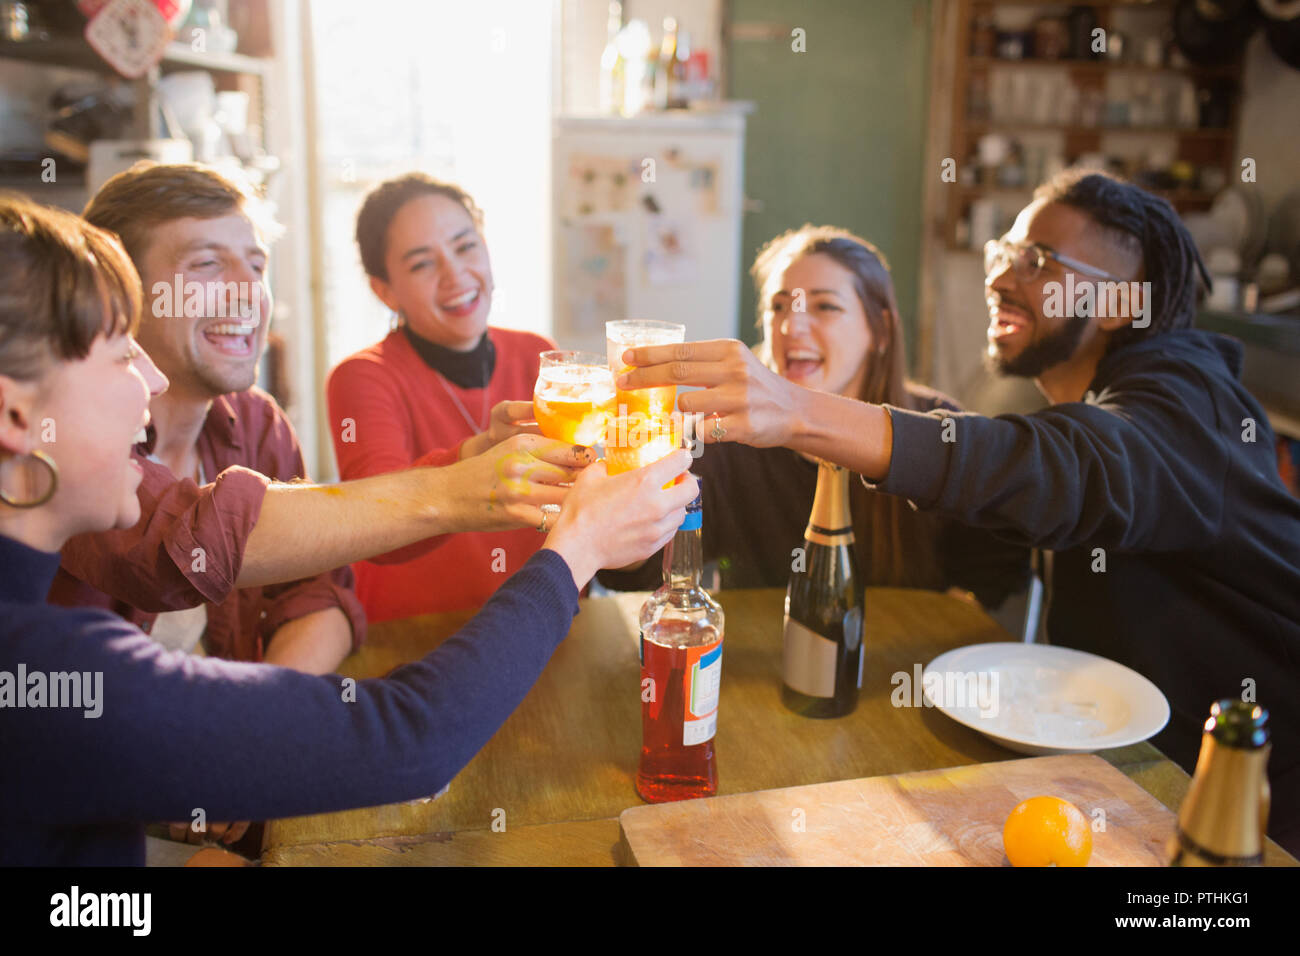 Young adult friends toasting cocktails at apartment kitchen table Stock Photo